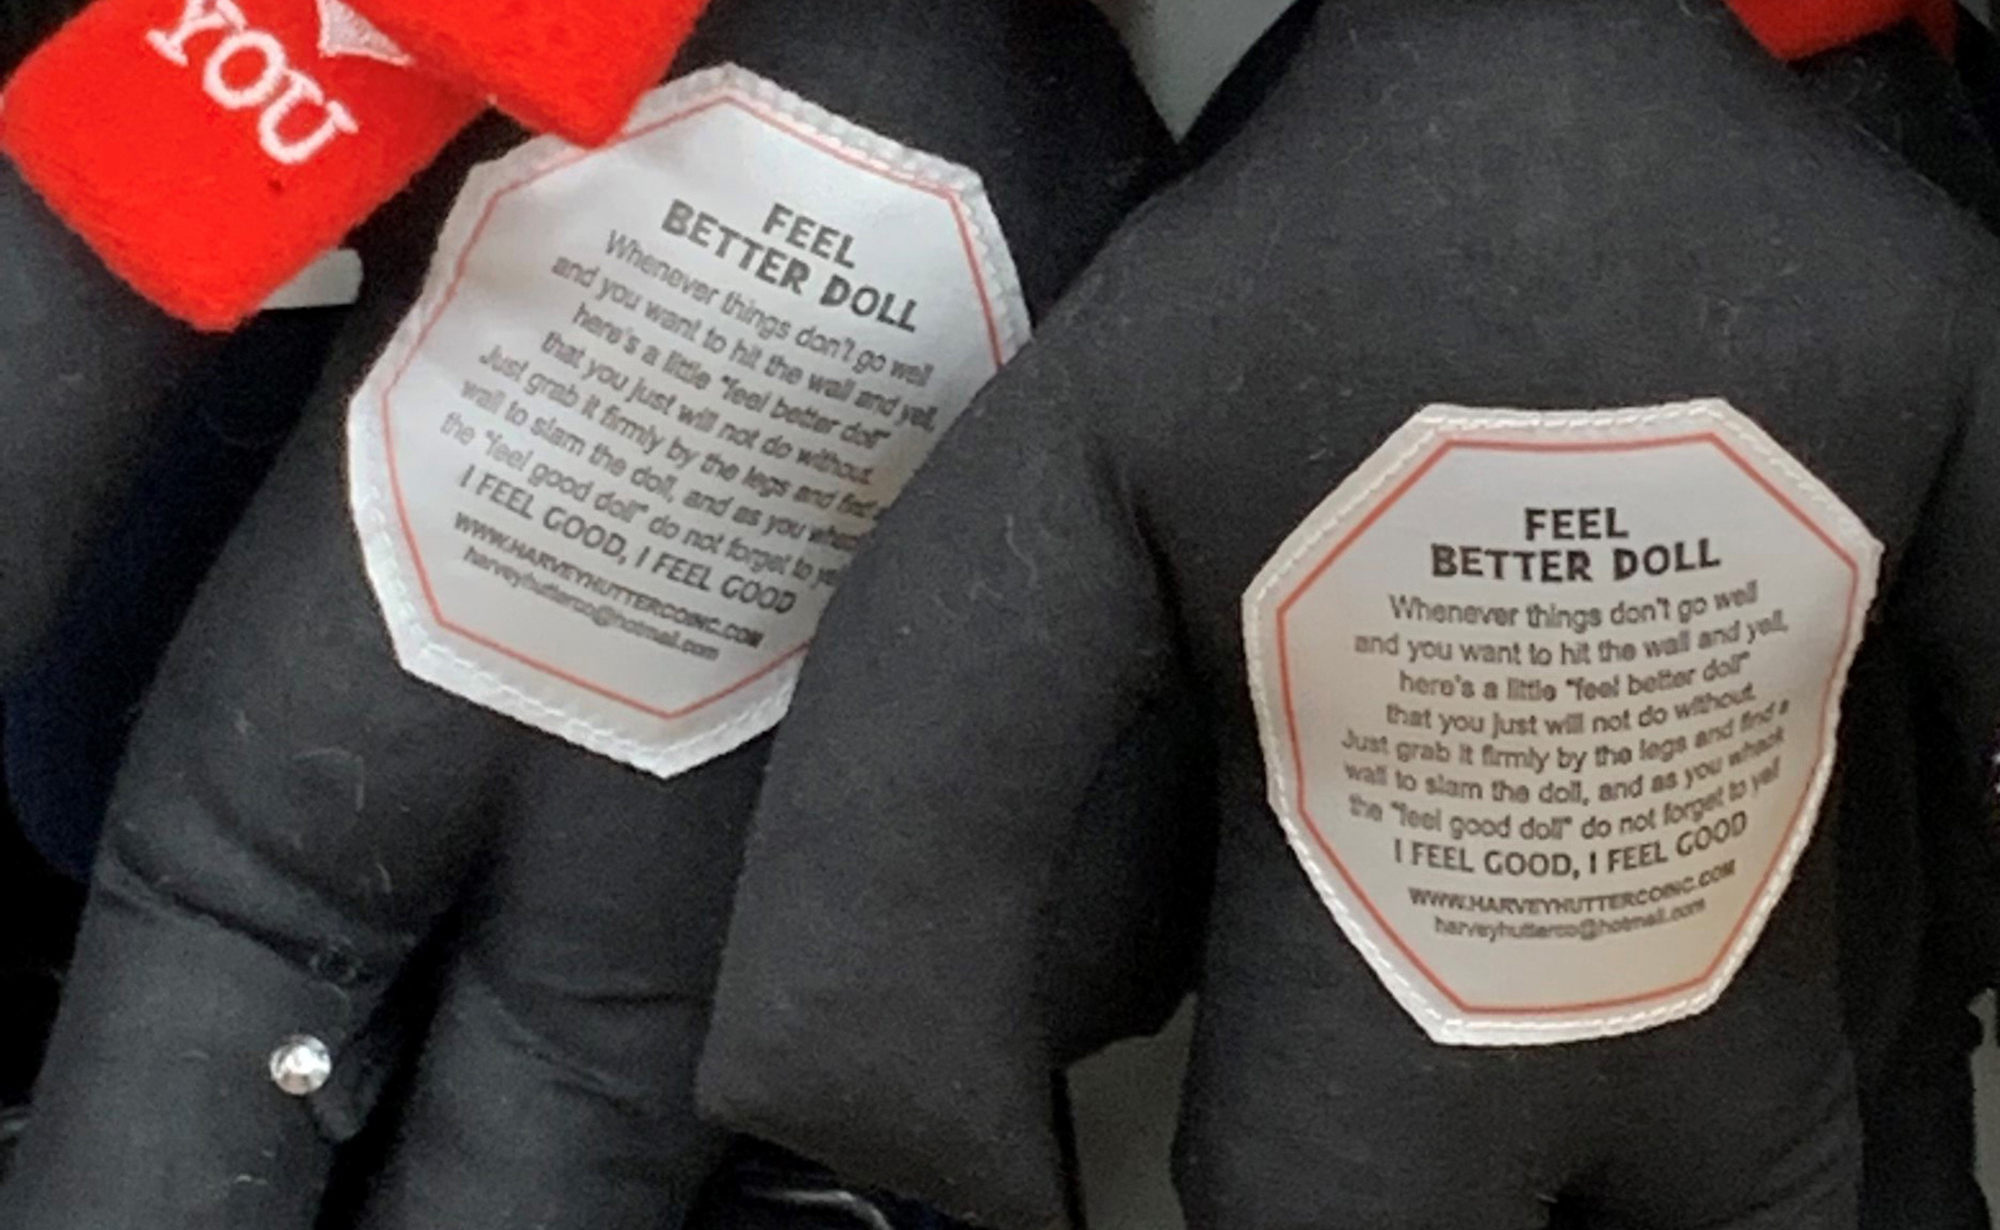 Black rag dolls meant to be abused are pulled from stores